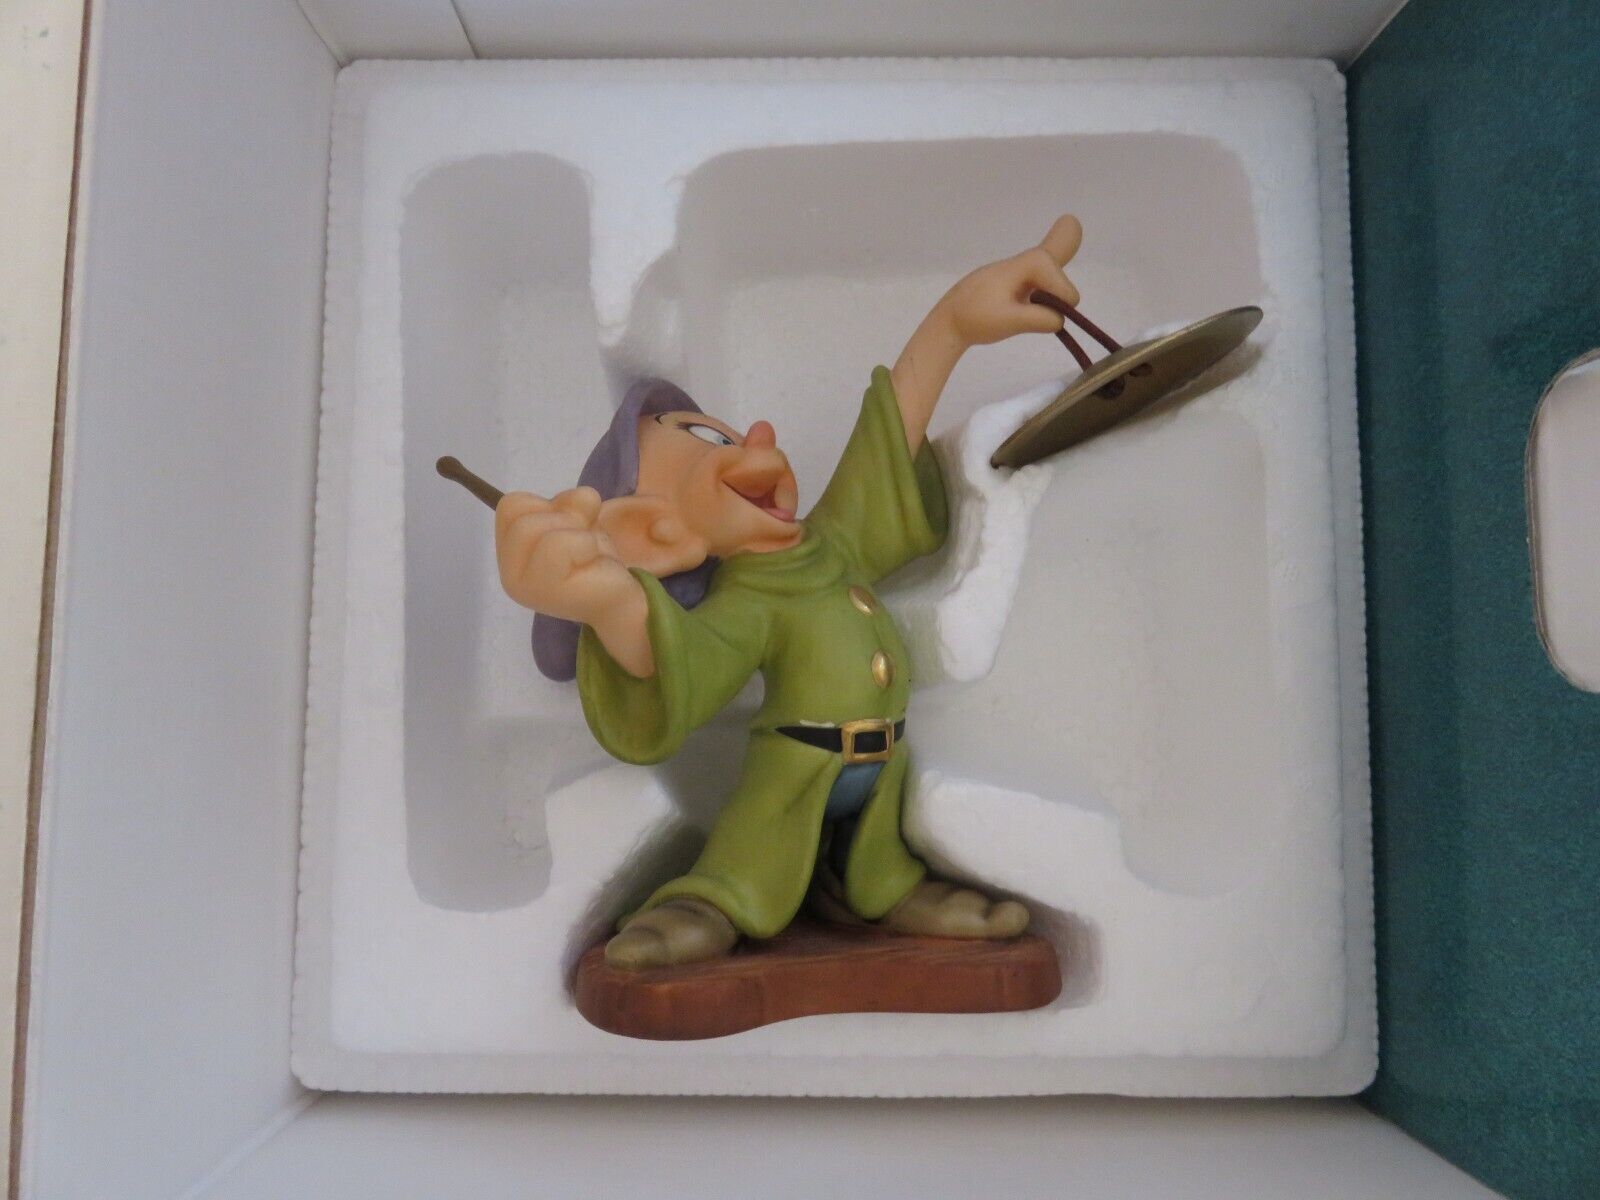 Disney\'s Classic Collection WDCC Dopey with Cymbal figurine Original Box & COA